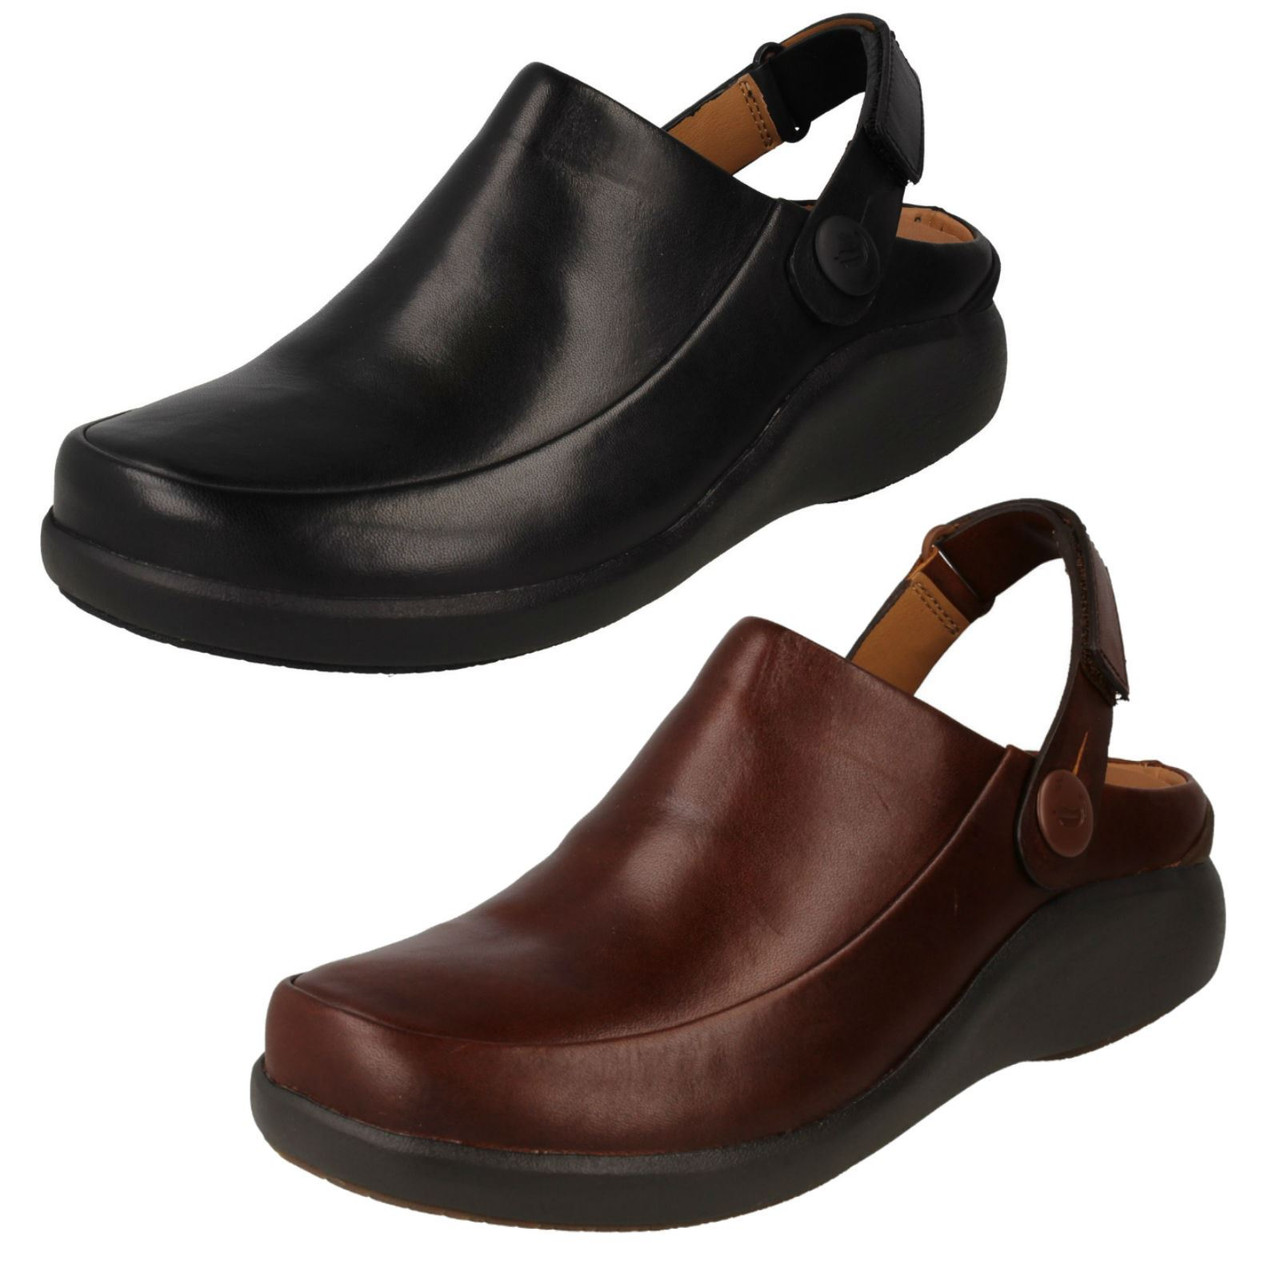 clarks structured ladies shoes